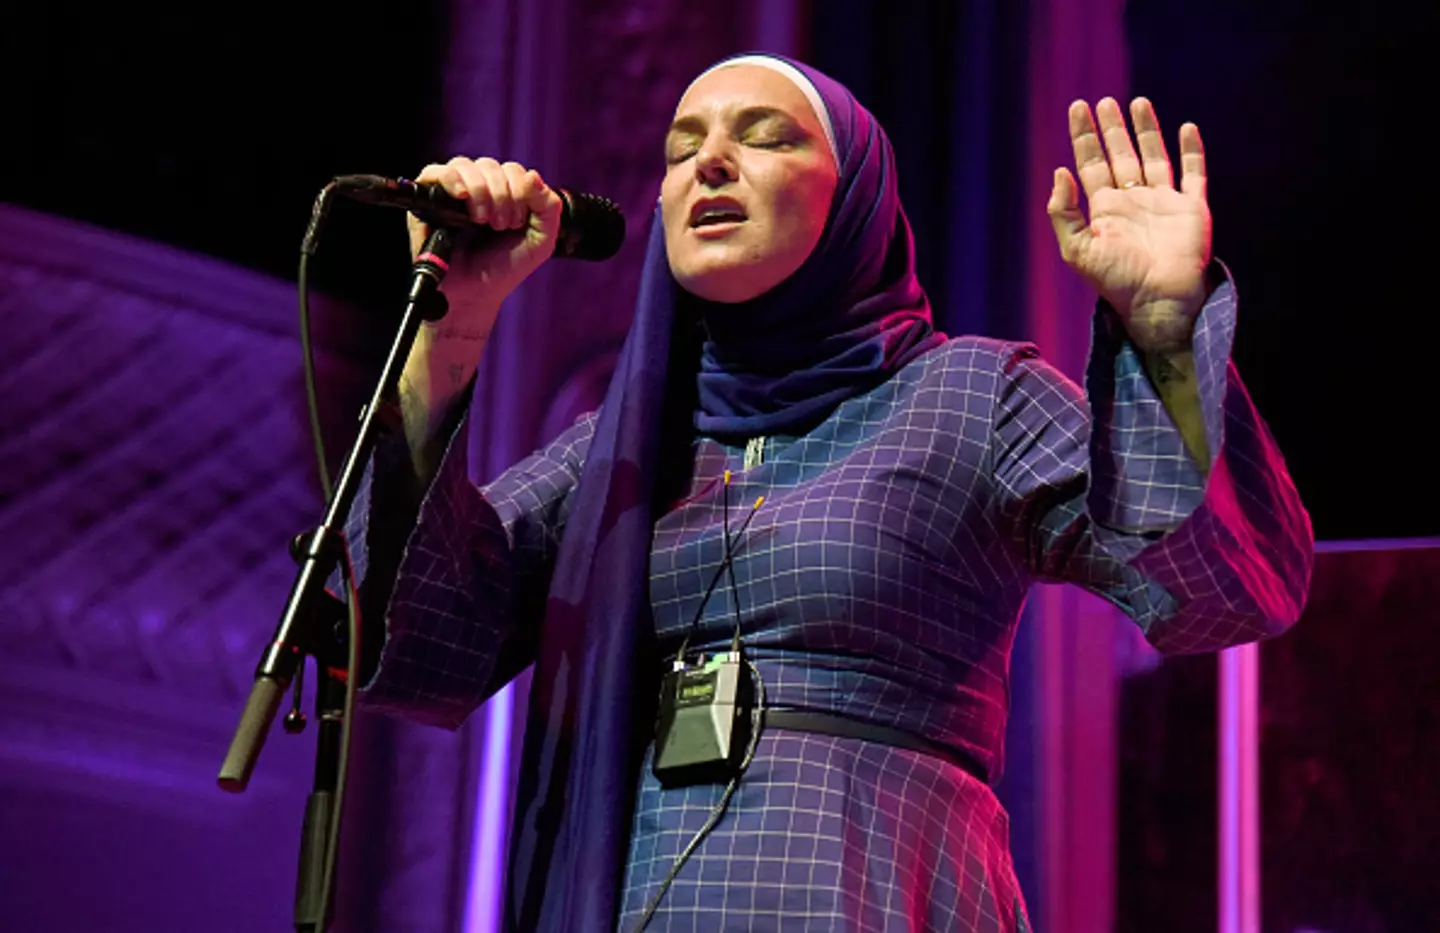 Sinéad O'Connor passed away at the age of 56.